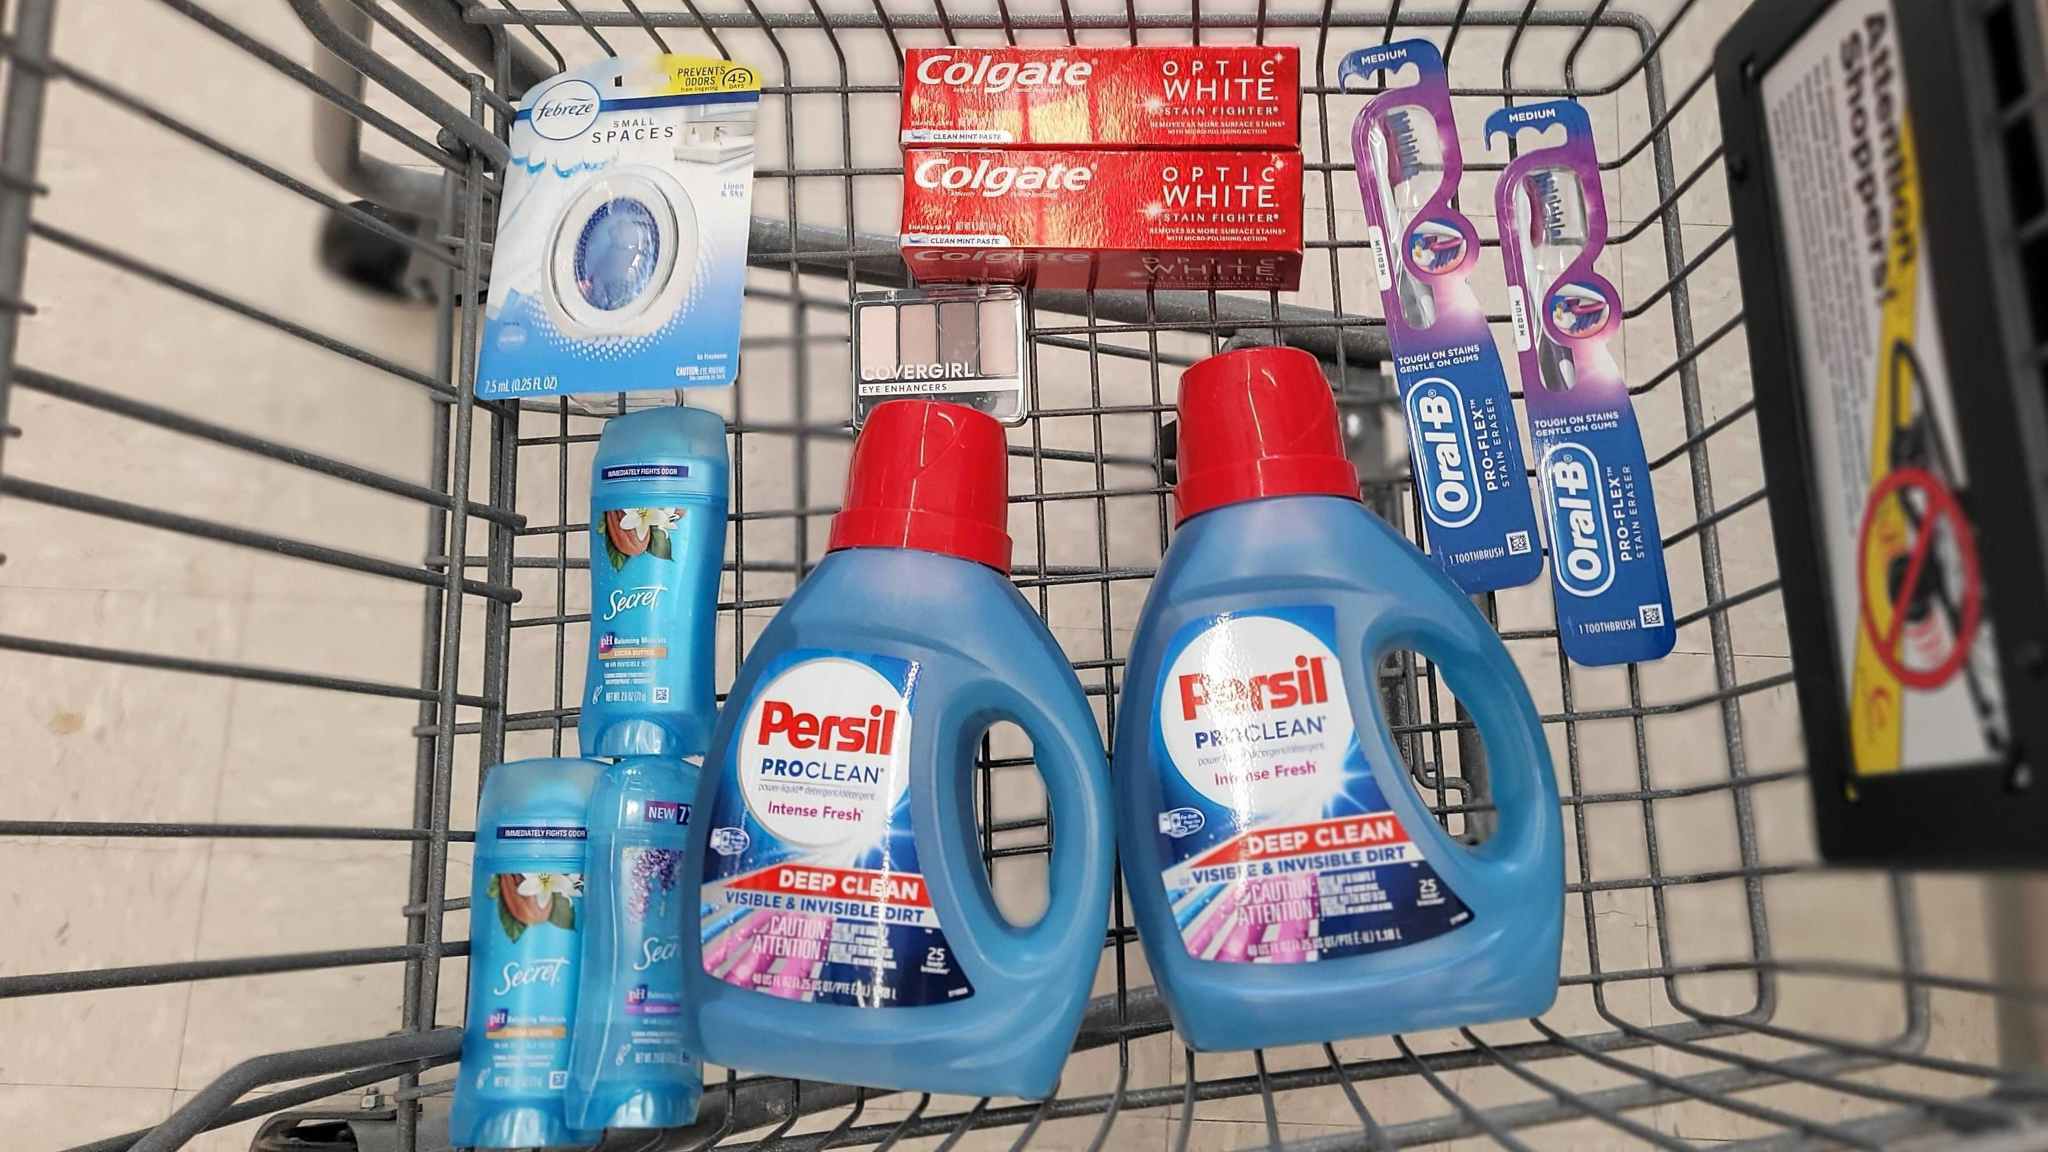 persil, colgate, febreze, secret, and covergirl products